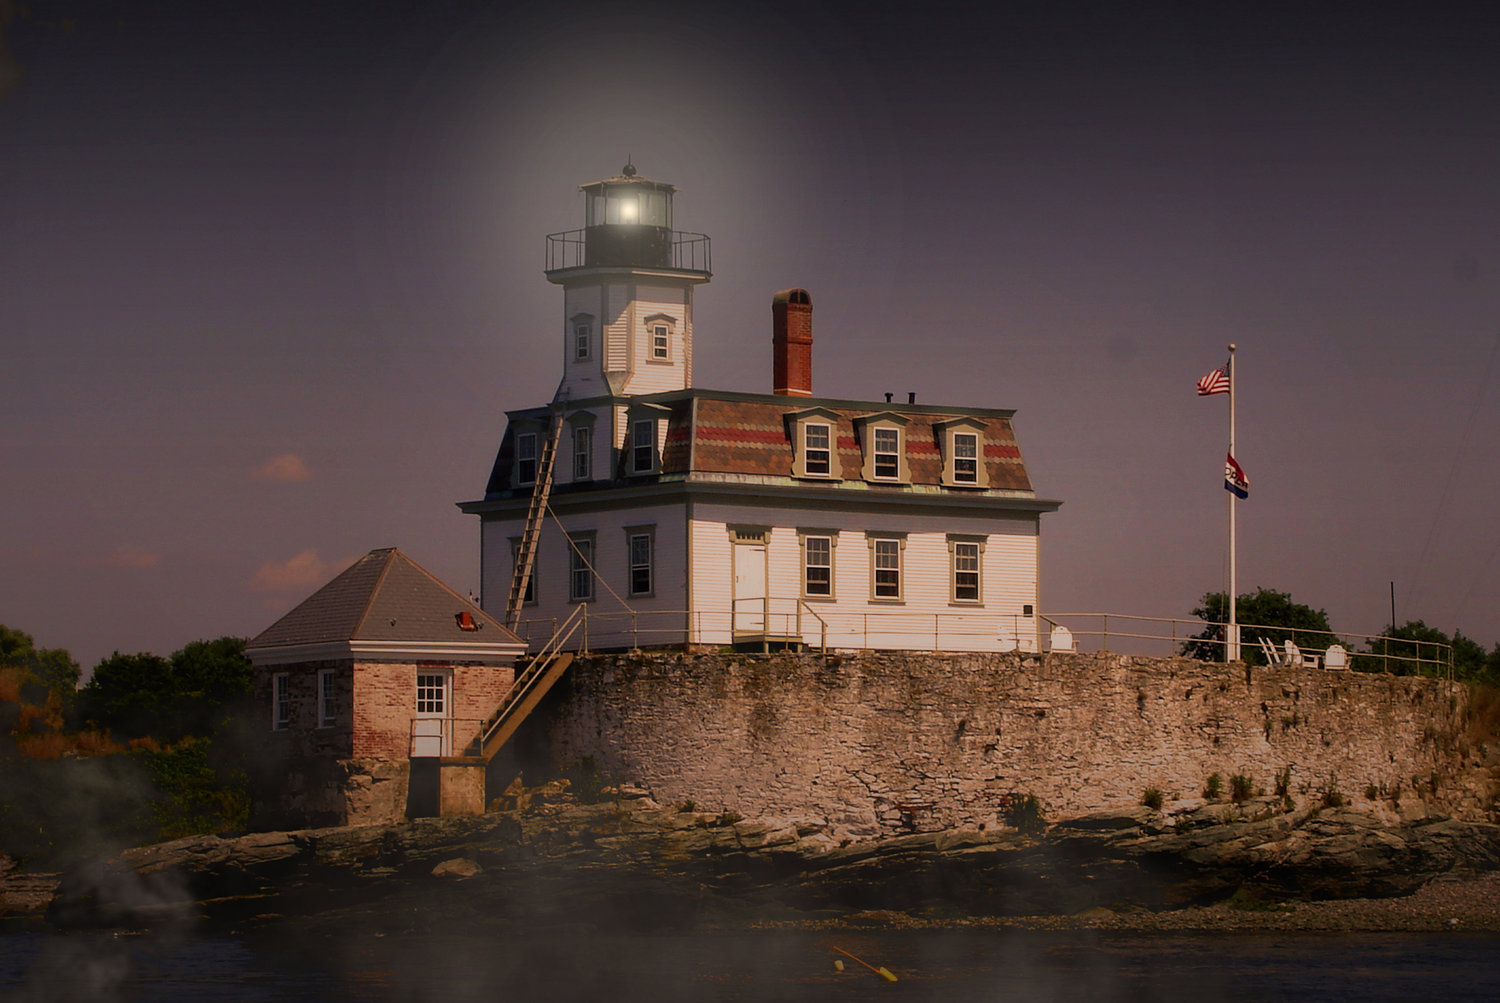 Visitors of Rose Island Lighthouse have claimed to feel the presence of its former keeper, Charles S. Curtis, still determined to keep the light on